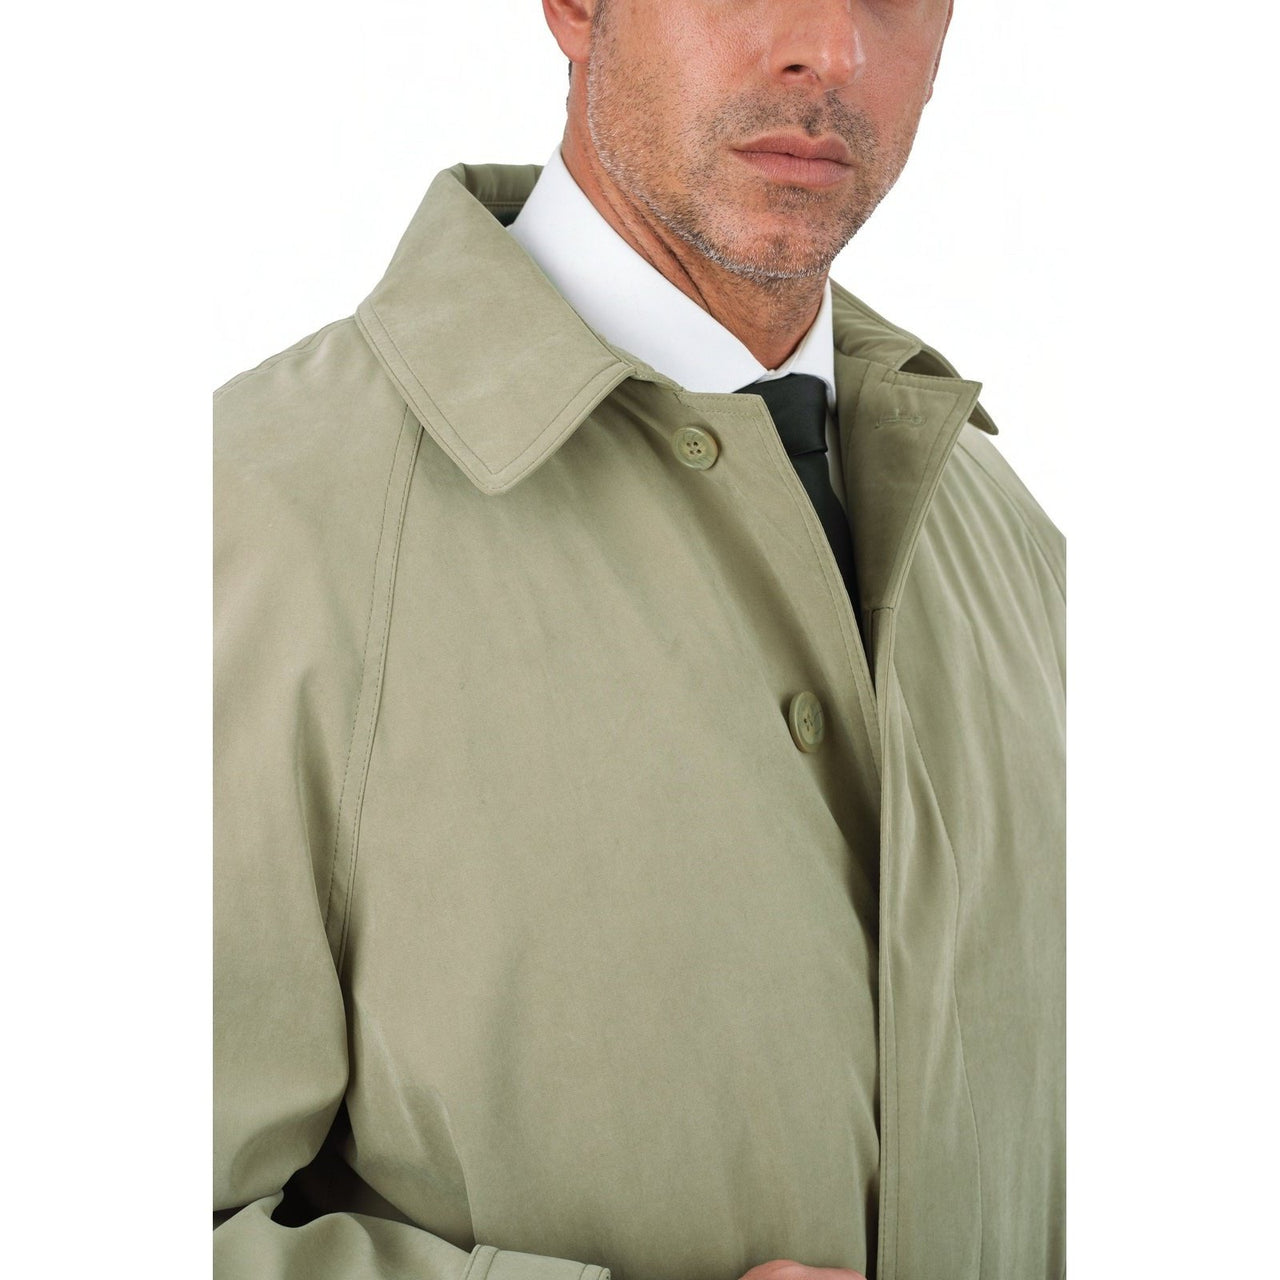 Cianni Cellini OUTERWEAR Men's Single Breasted Beige Long Trench Coat Jacket With Removable Belt & Liner